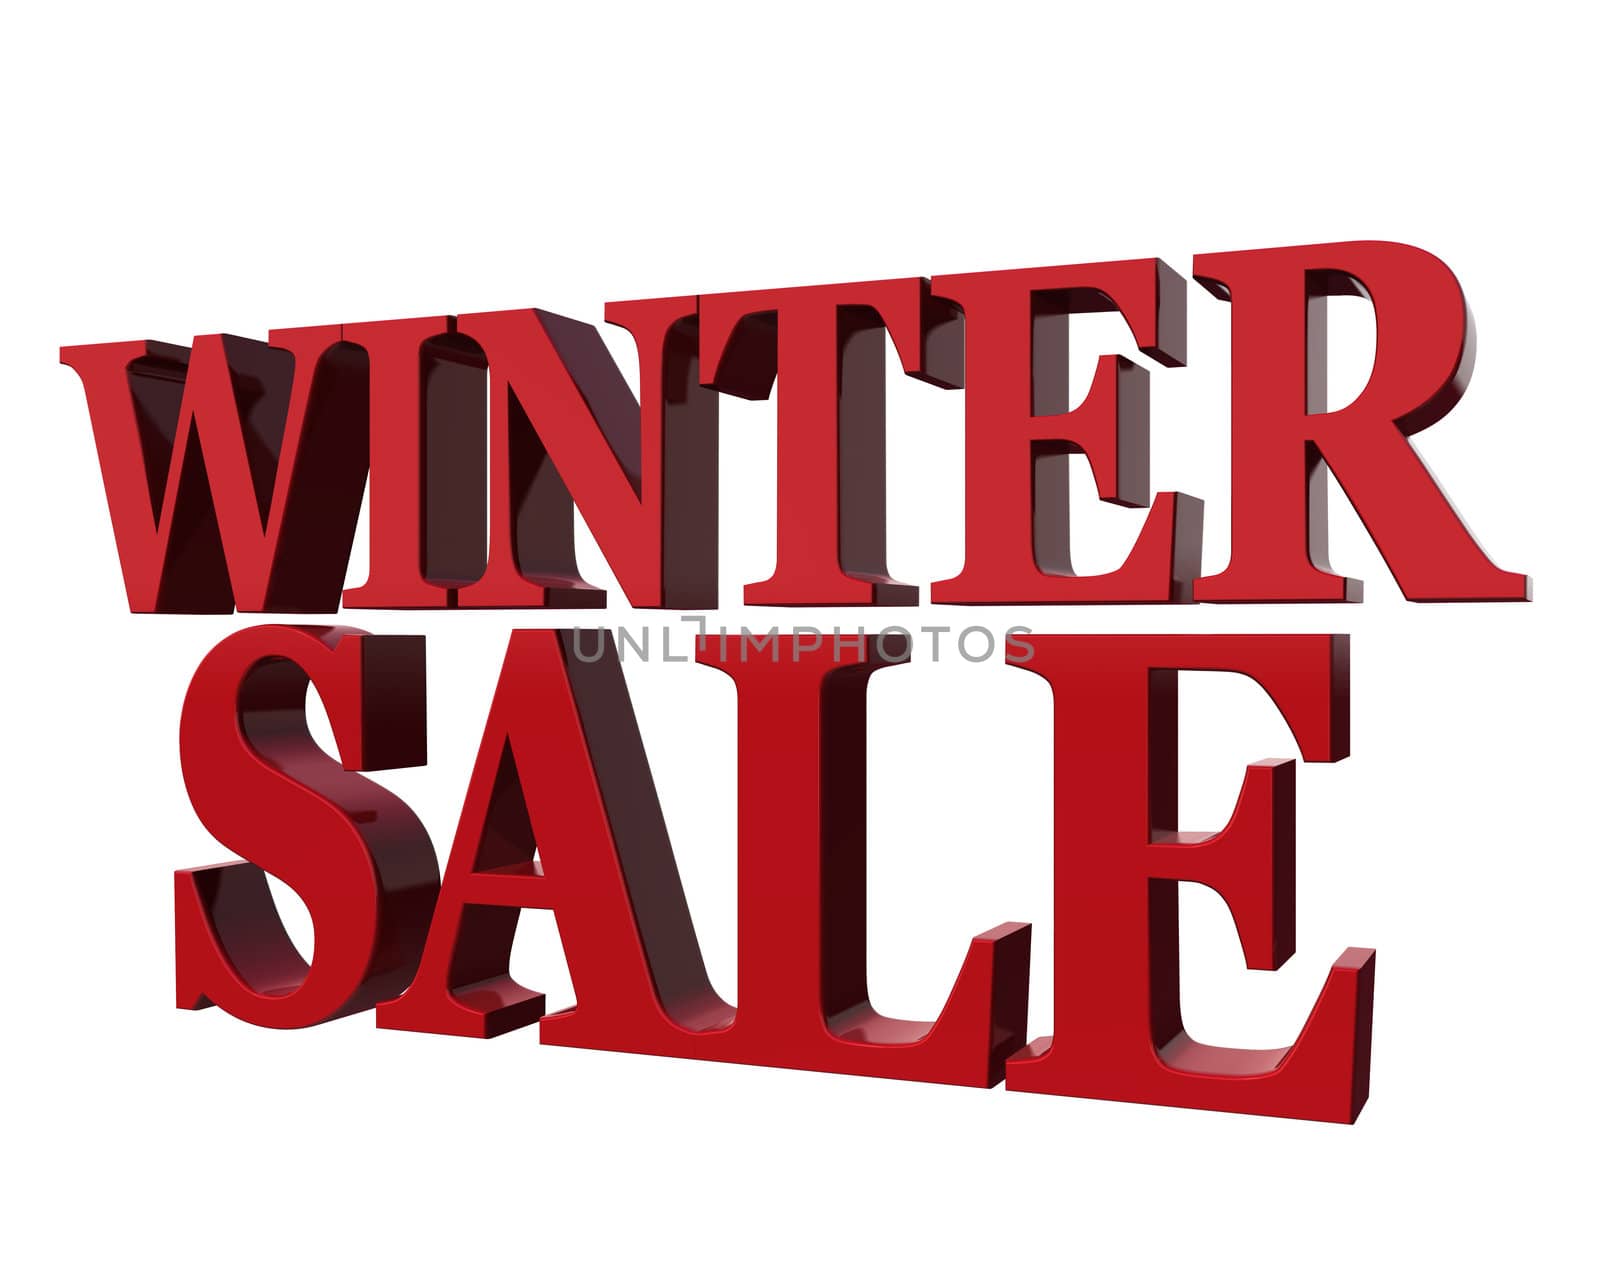 Winter sale. Promotional message in red isolated on a white background.